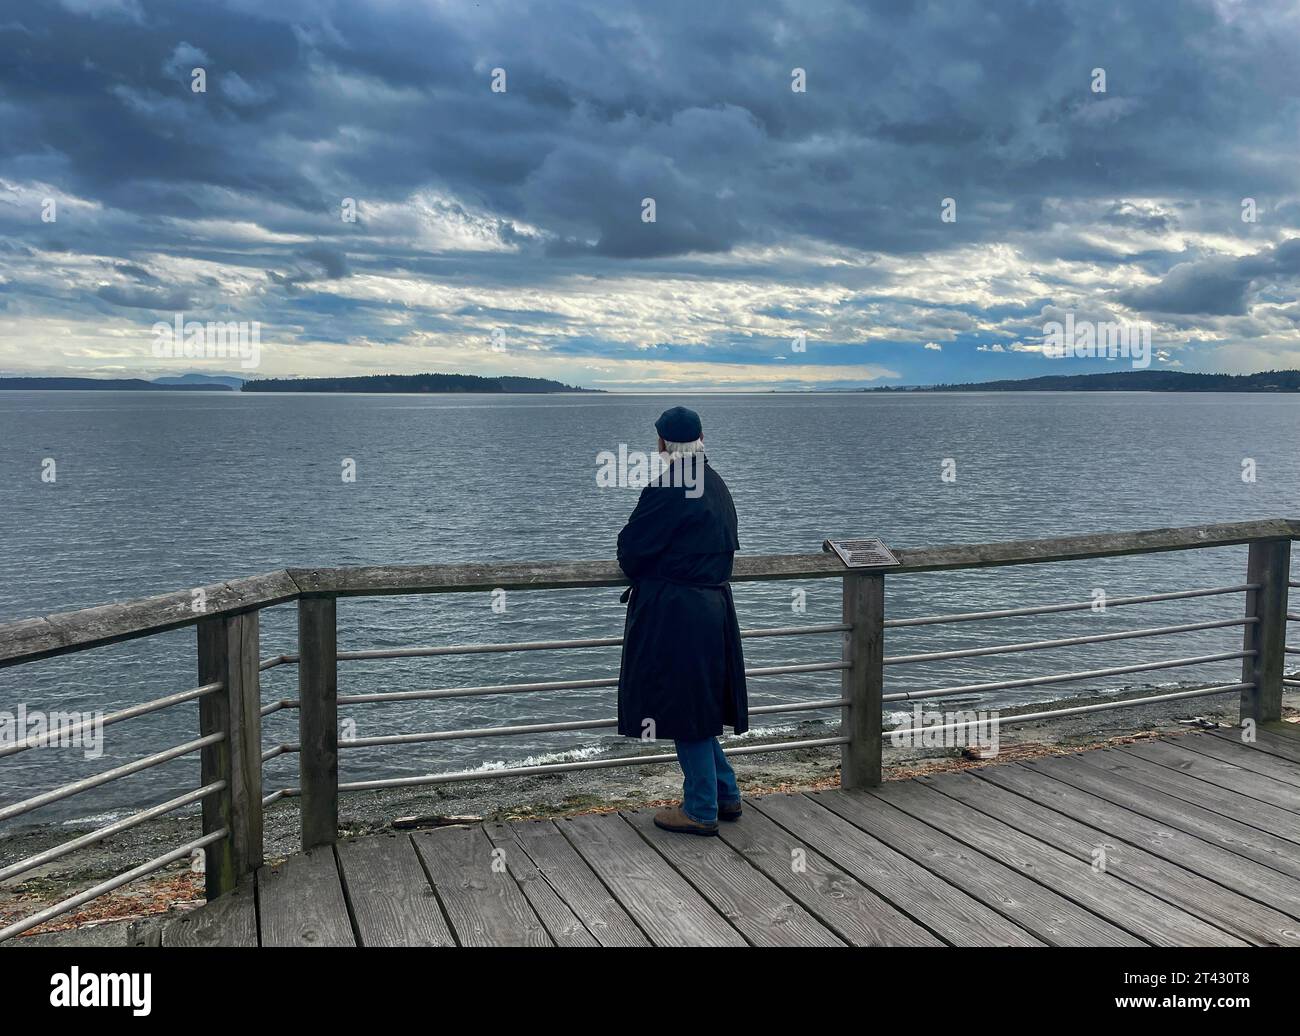 Rear view of a man standing on a jetty looking out to sea on an overcast day, Sidney, British Columbia, Canada Stock Photo